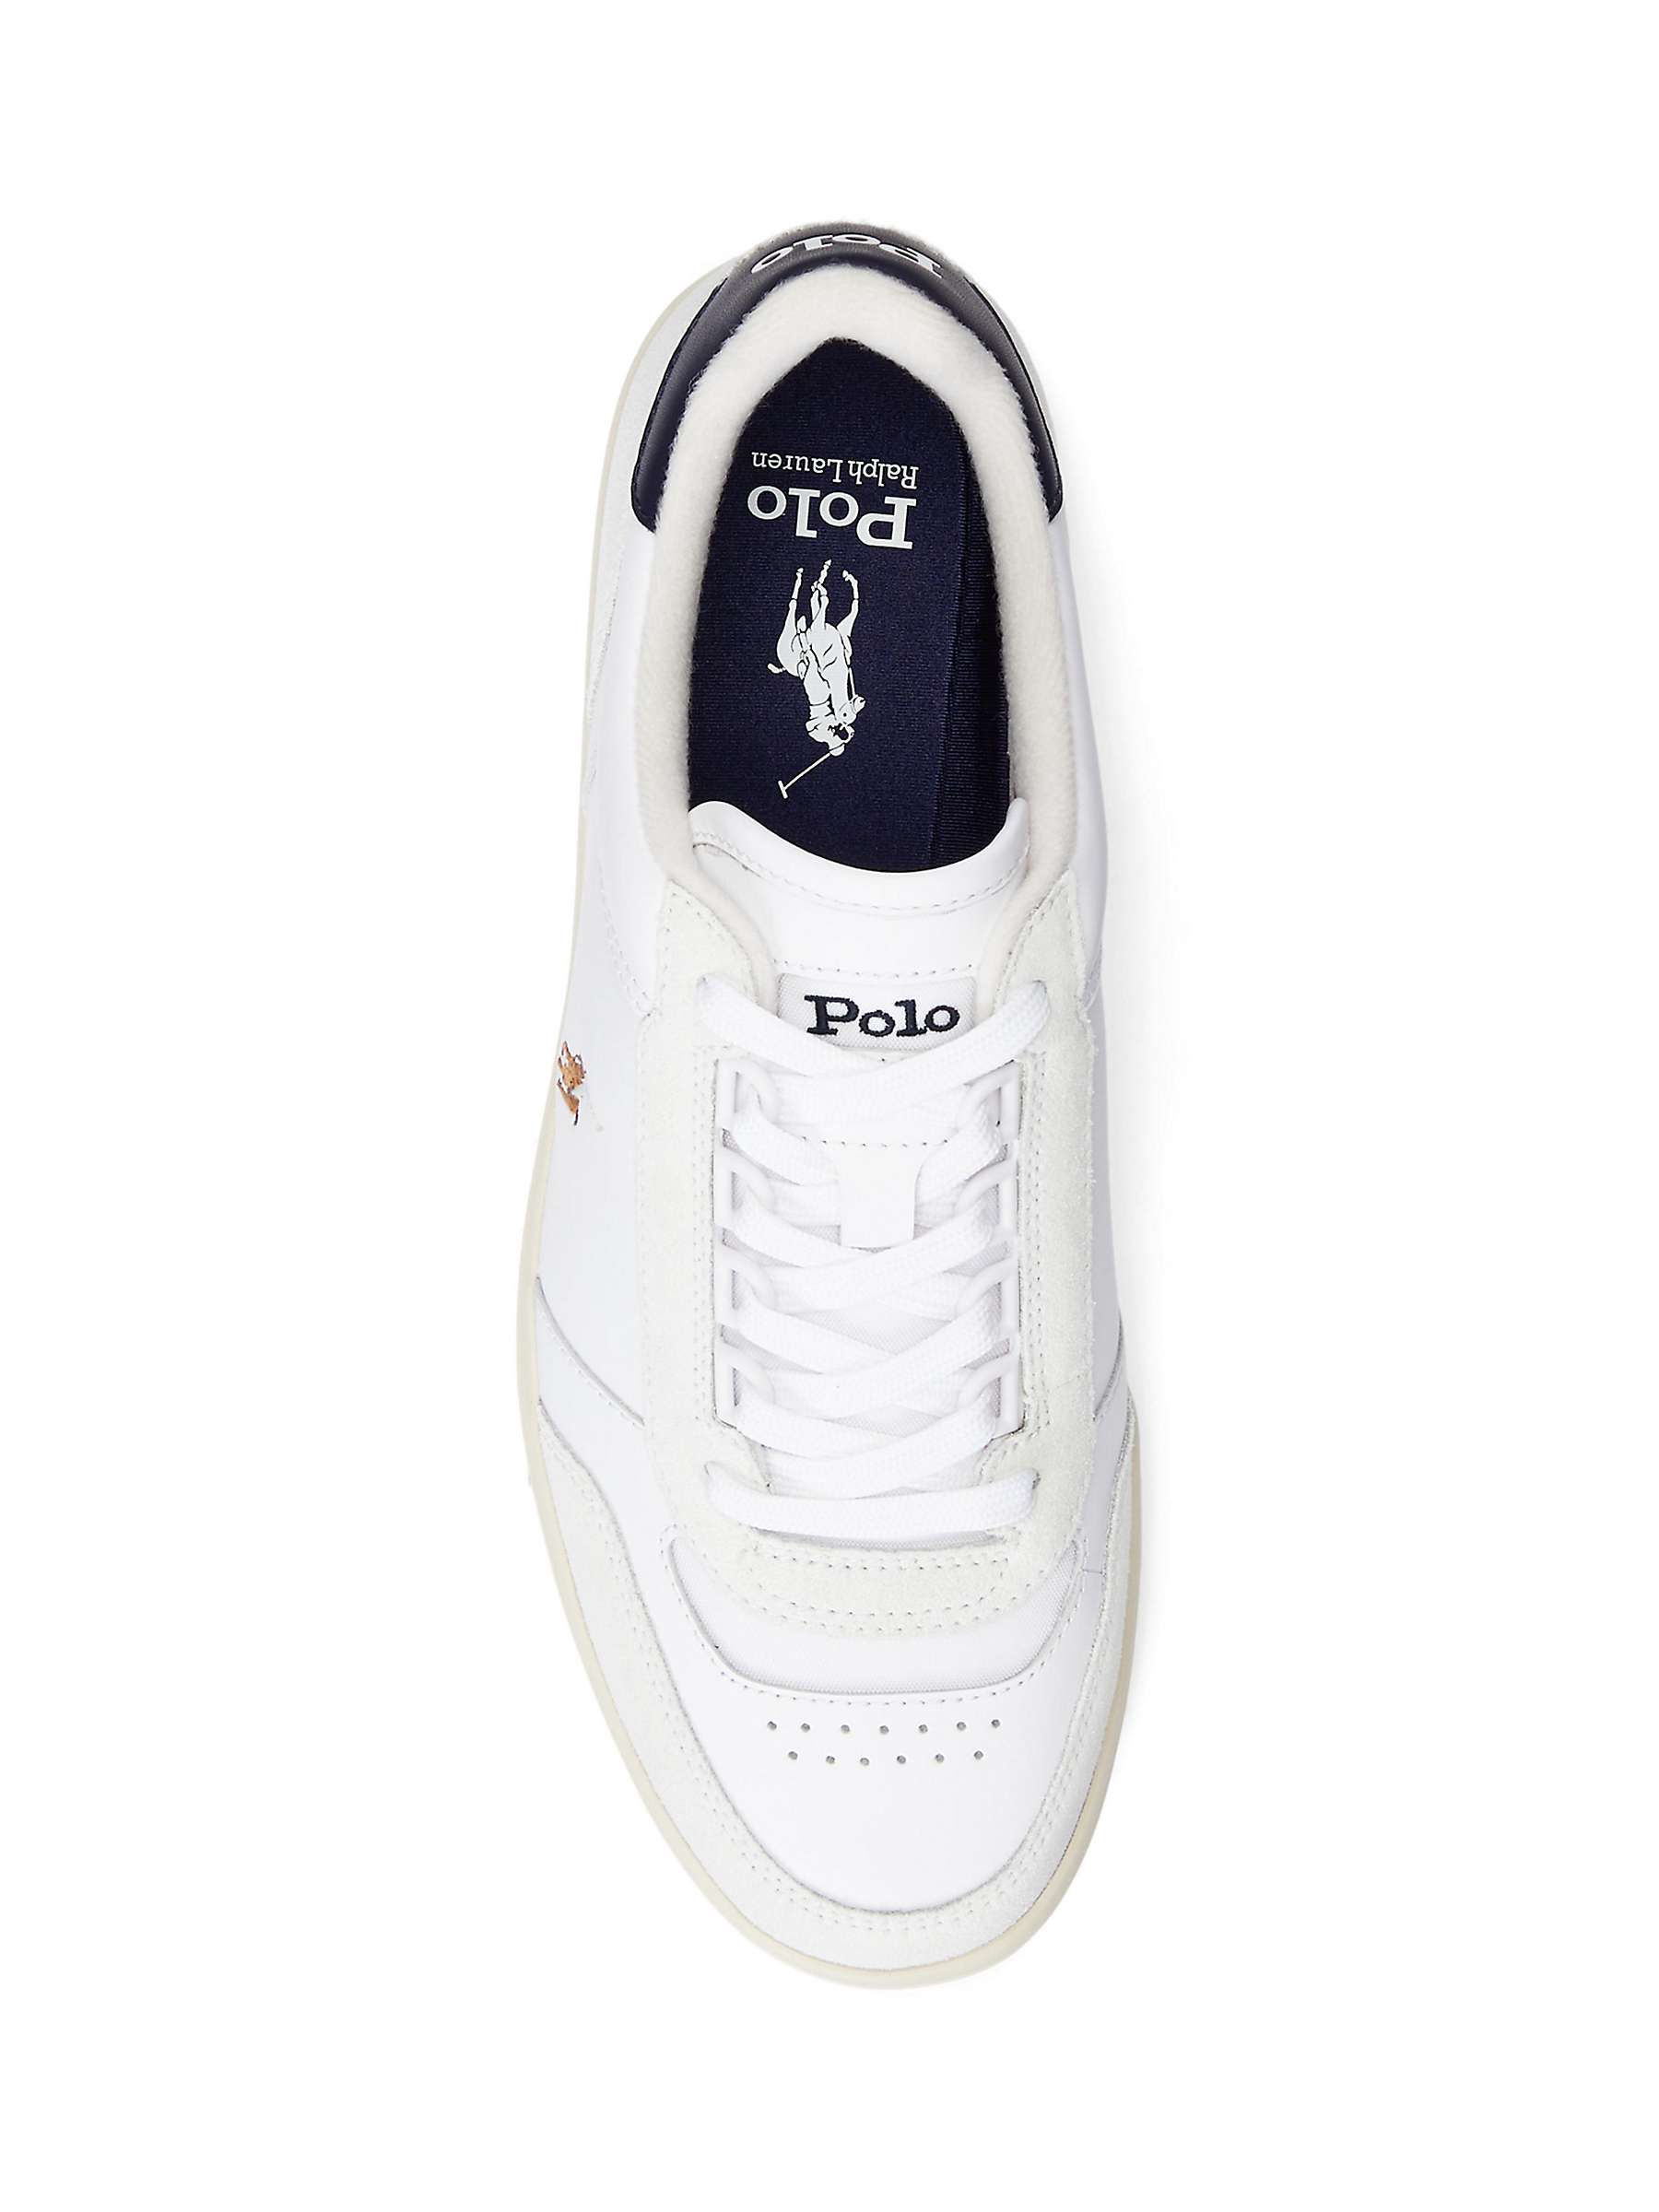 Buy Ralph Lauren Polo Leather Suede Court Trainers, White/Navy Online at johnlewis.com